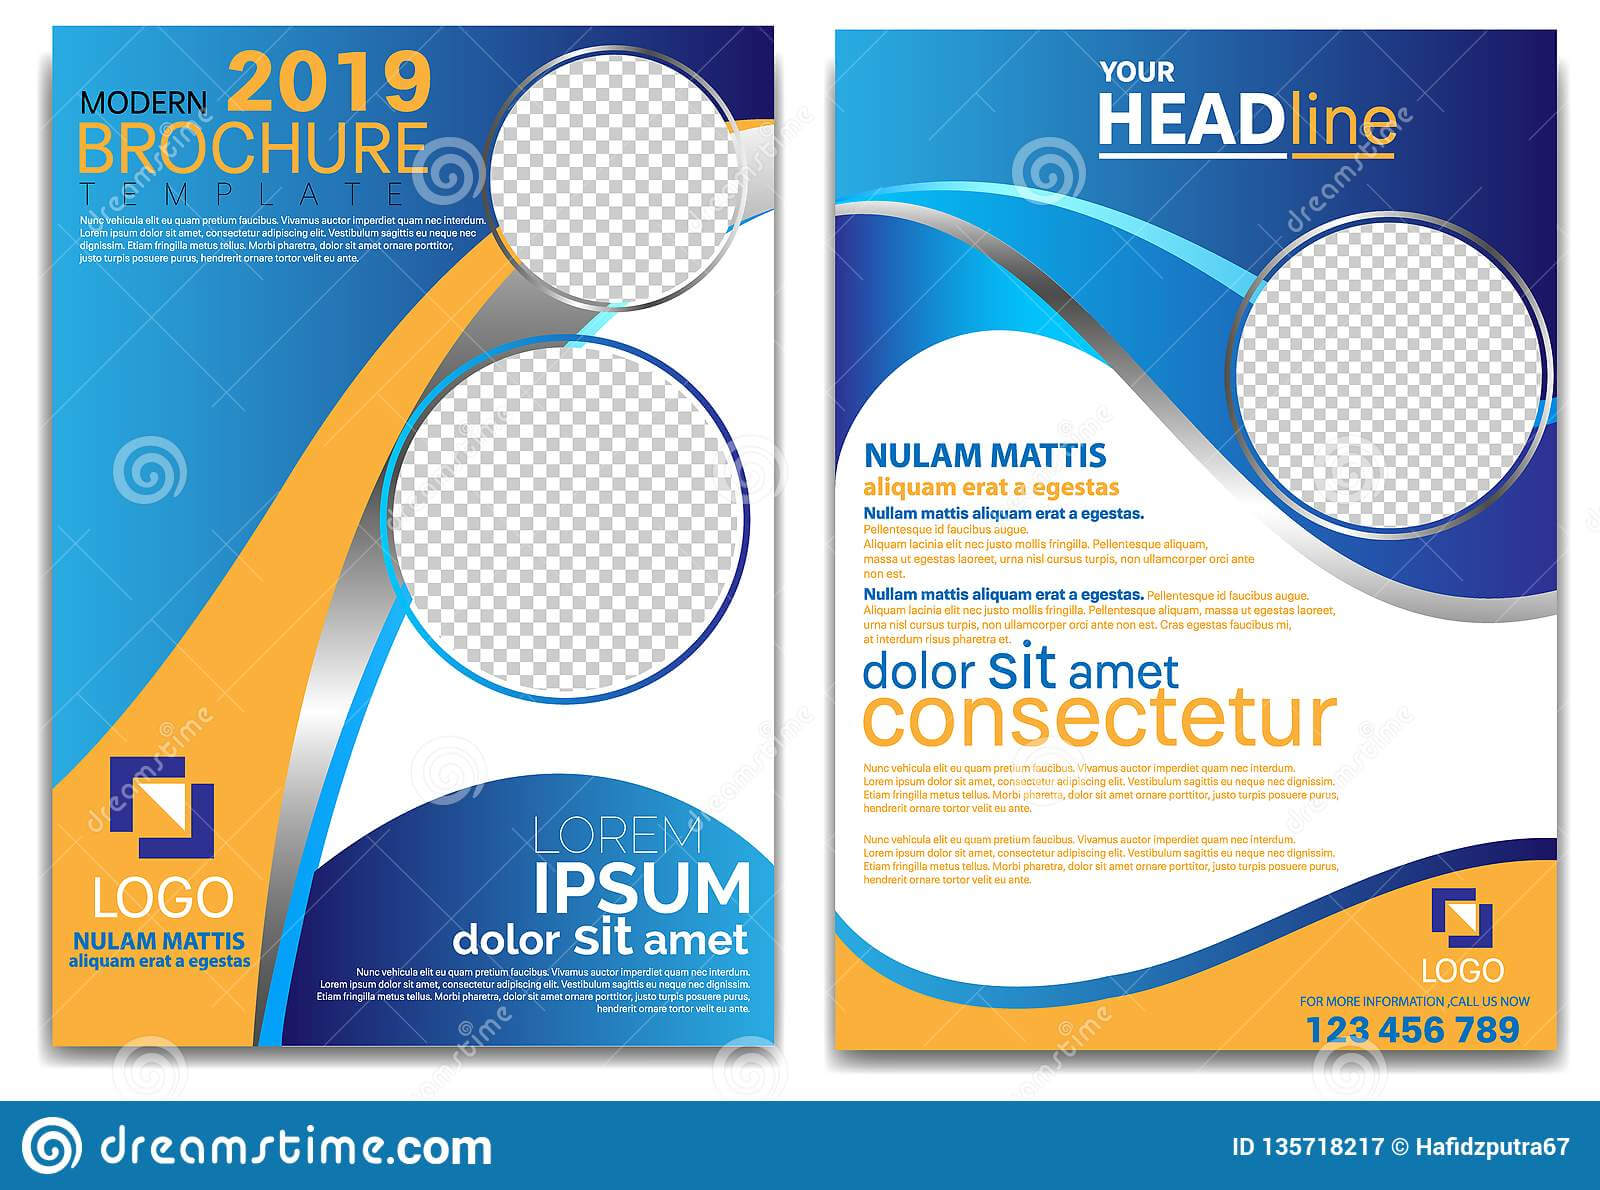 Modern Brochure Template 2019 And Professional Brochure Pertaining To School Brochure Design Templates